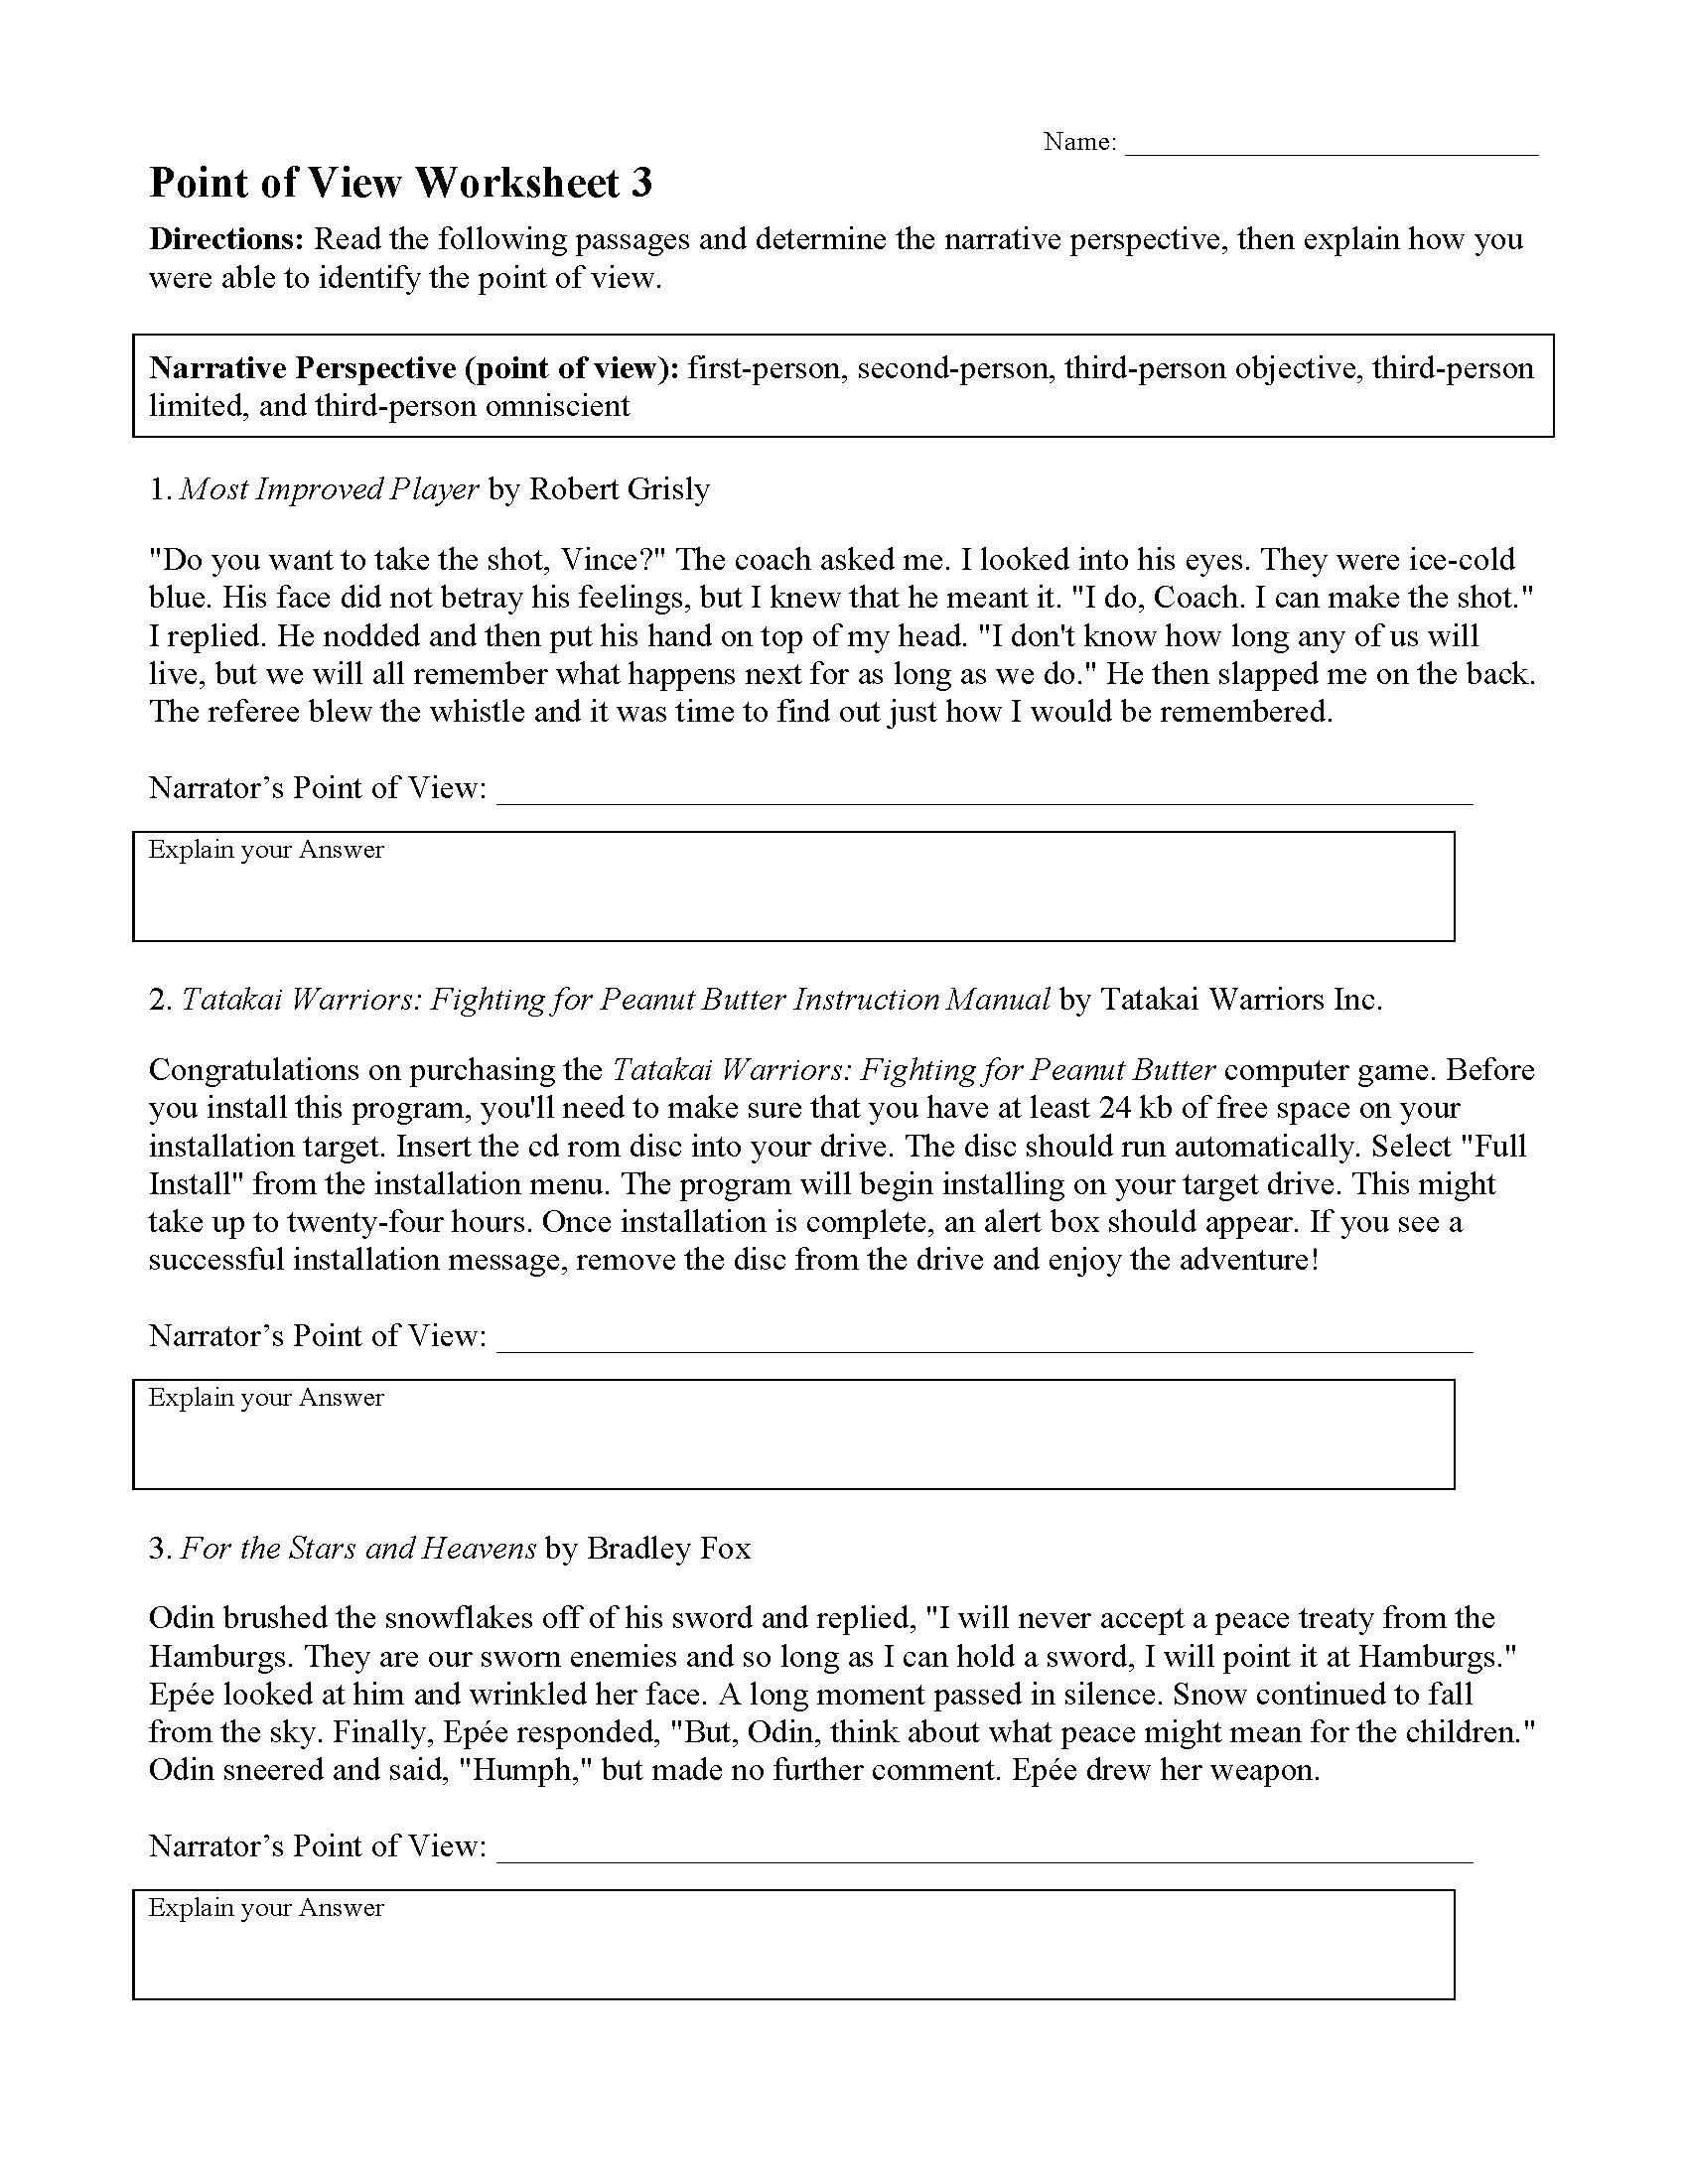 point-of-view-worksheet-3-slidedocnow